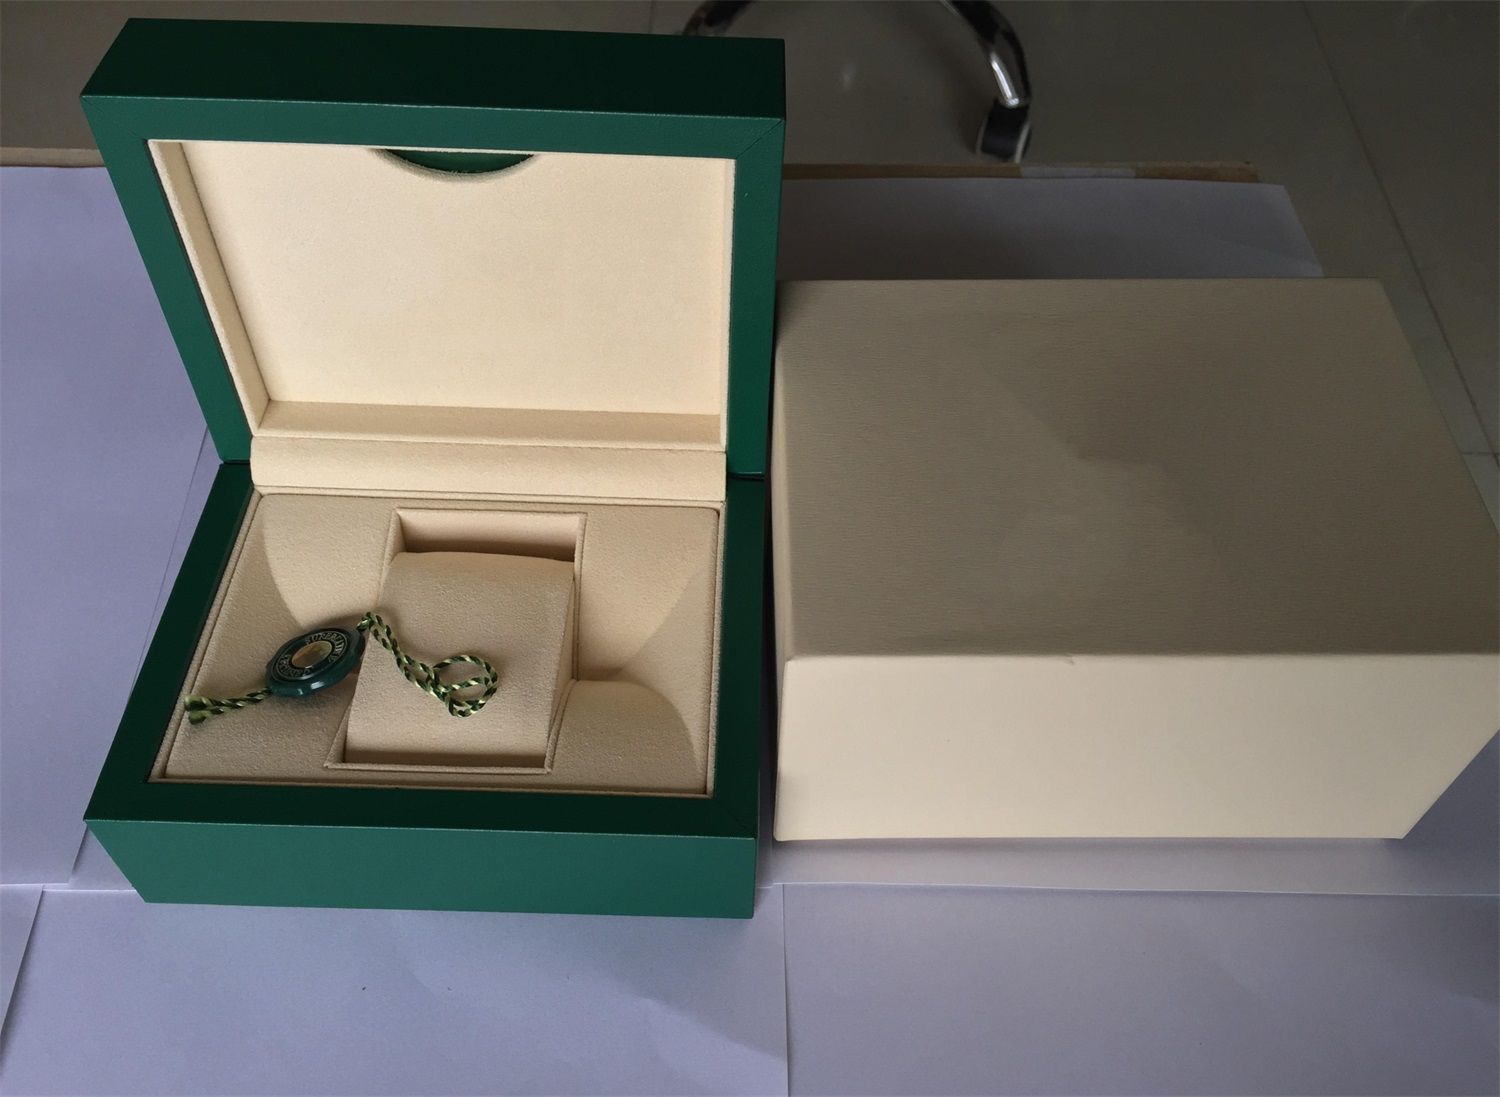 dhgate rolex with box